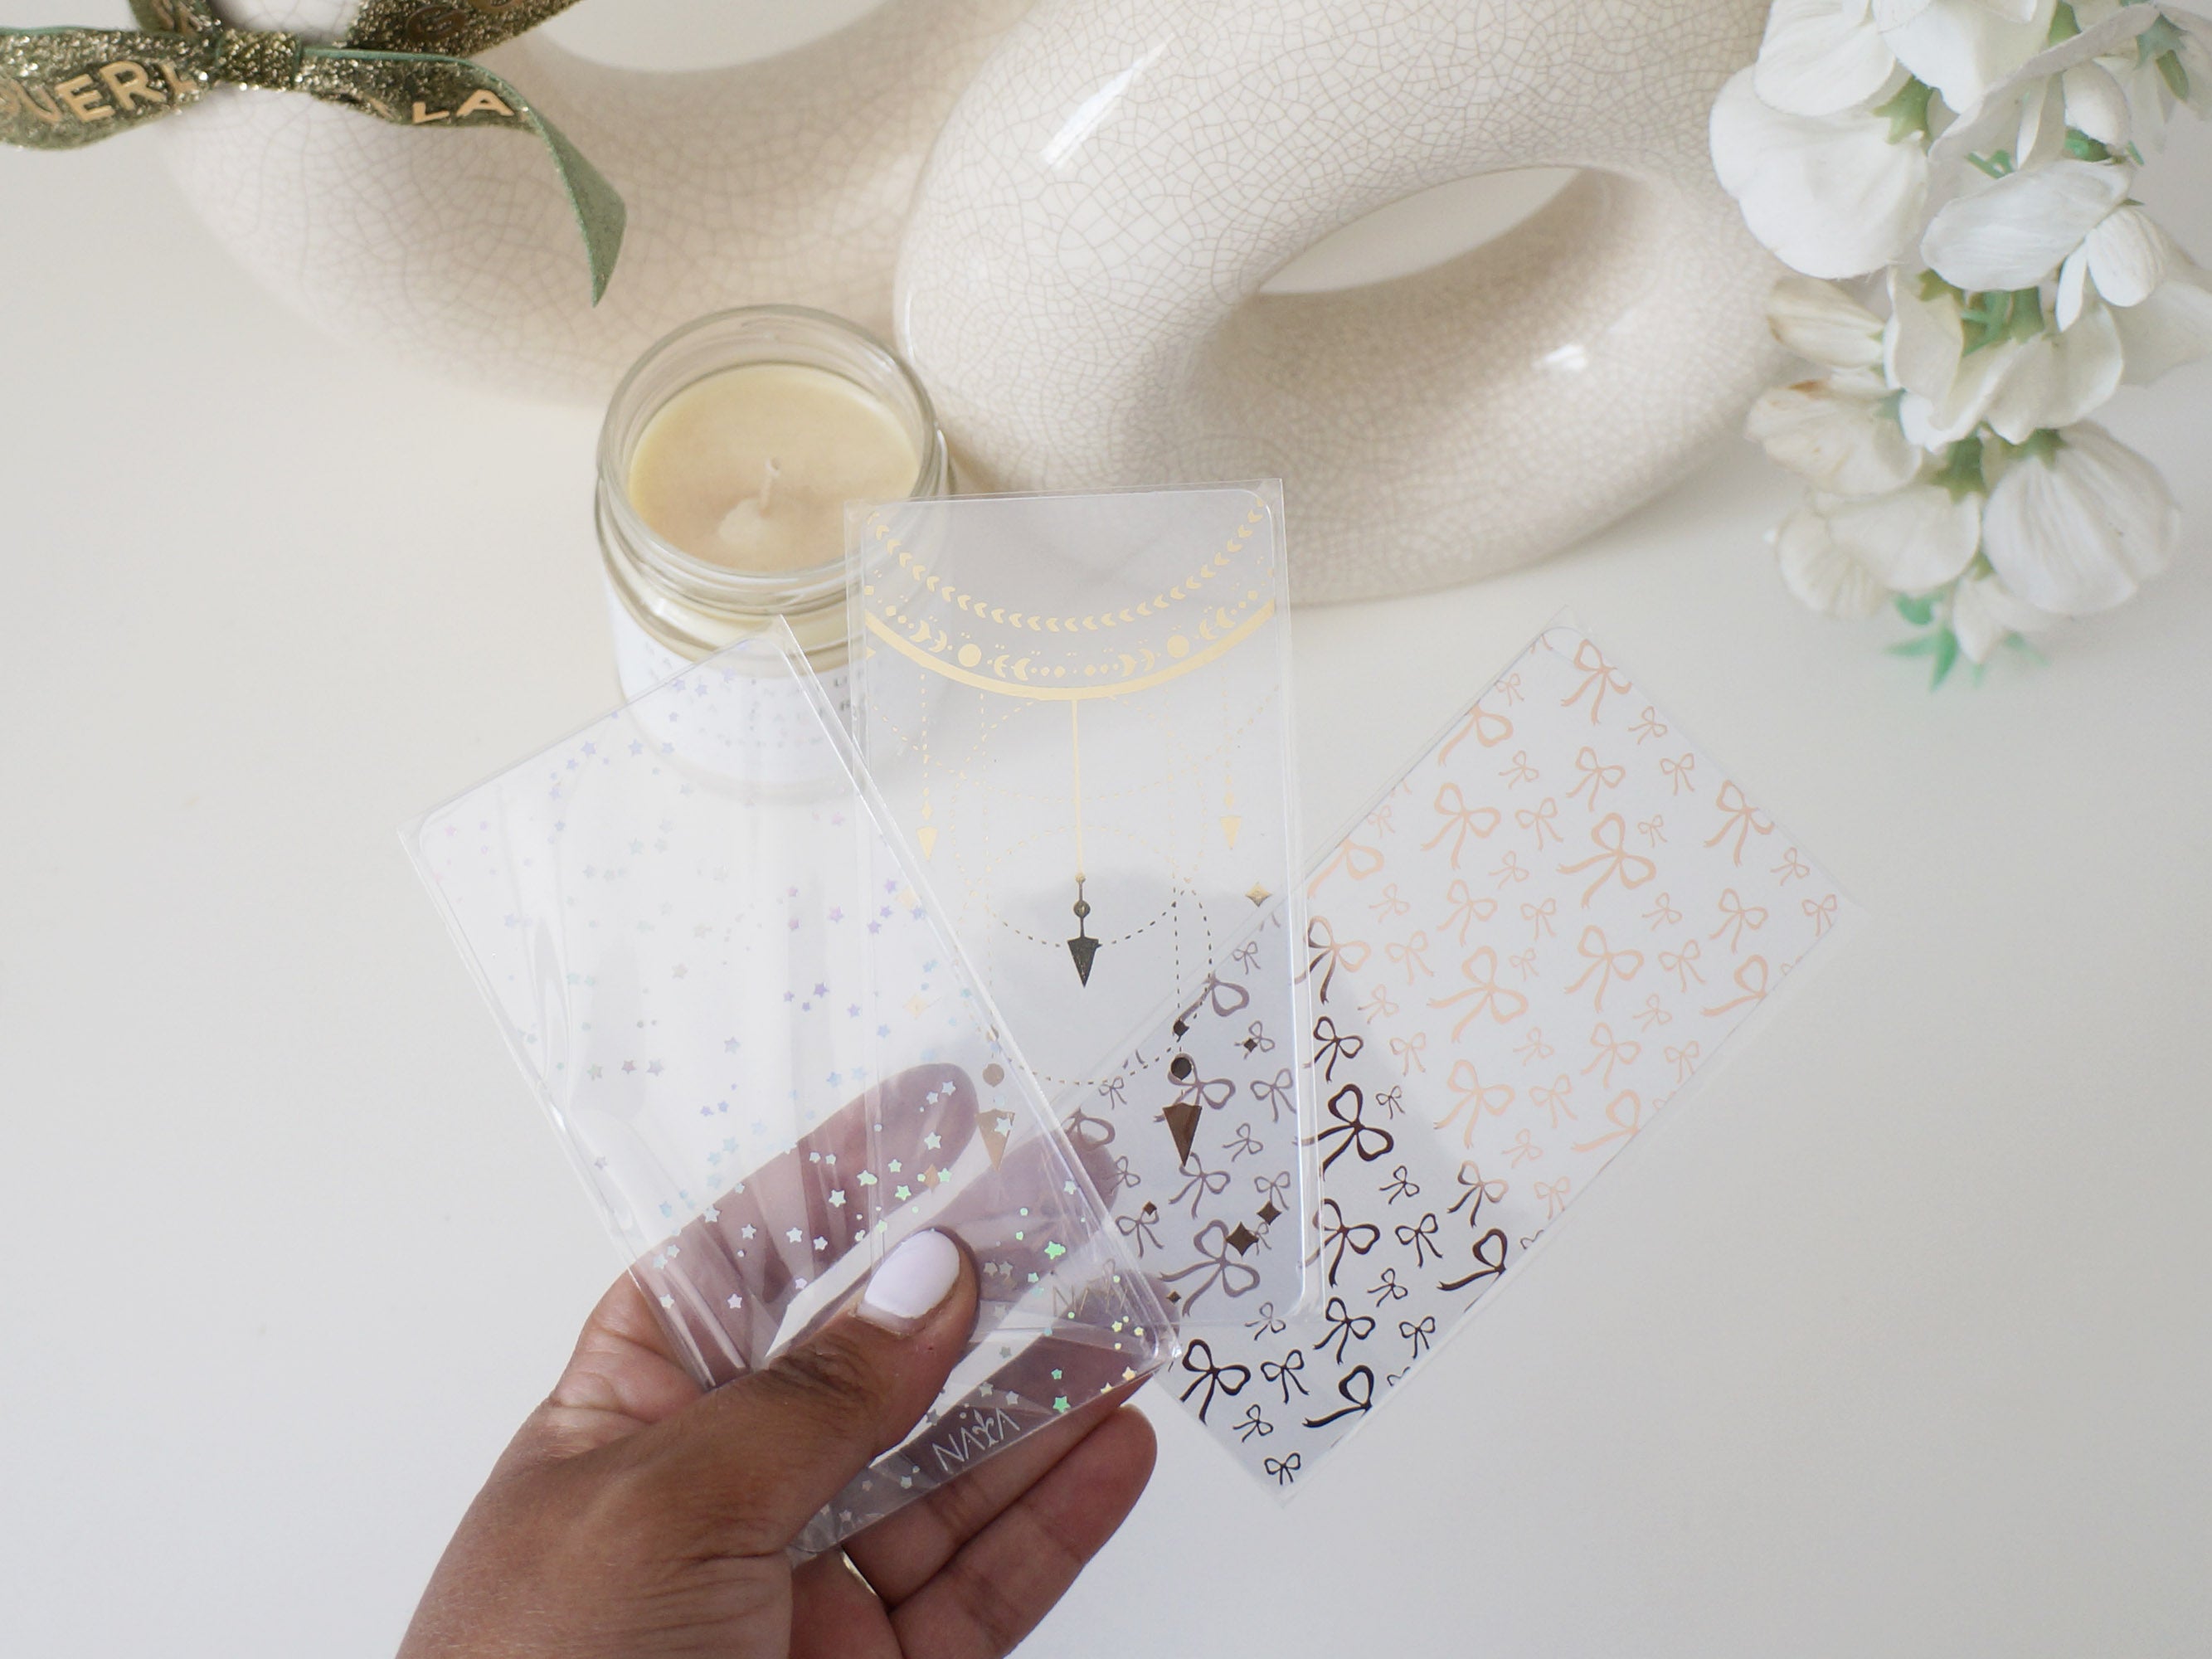 Foiled washis cards